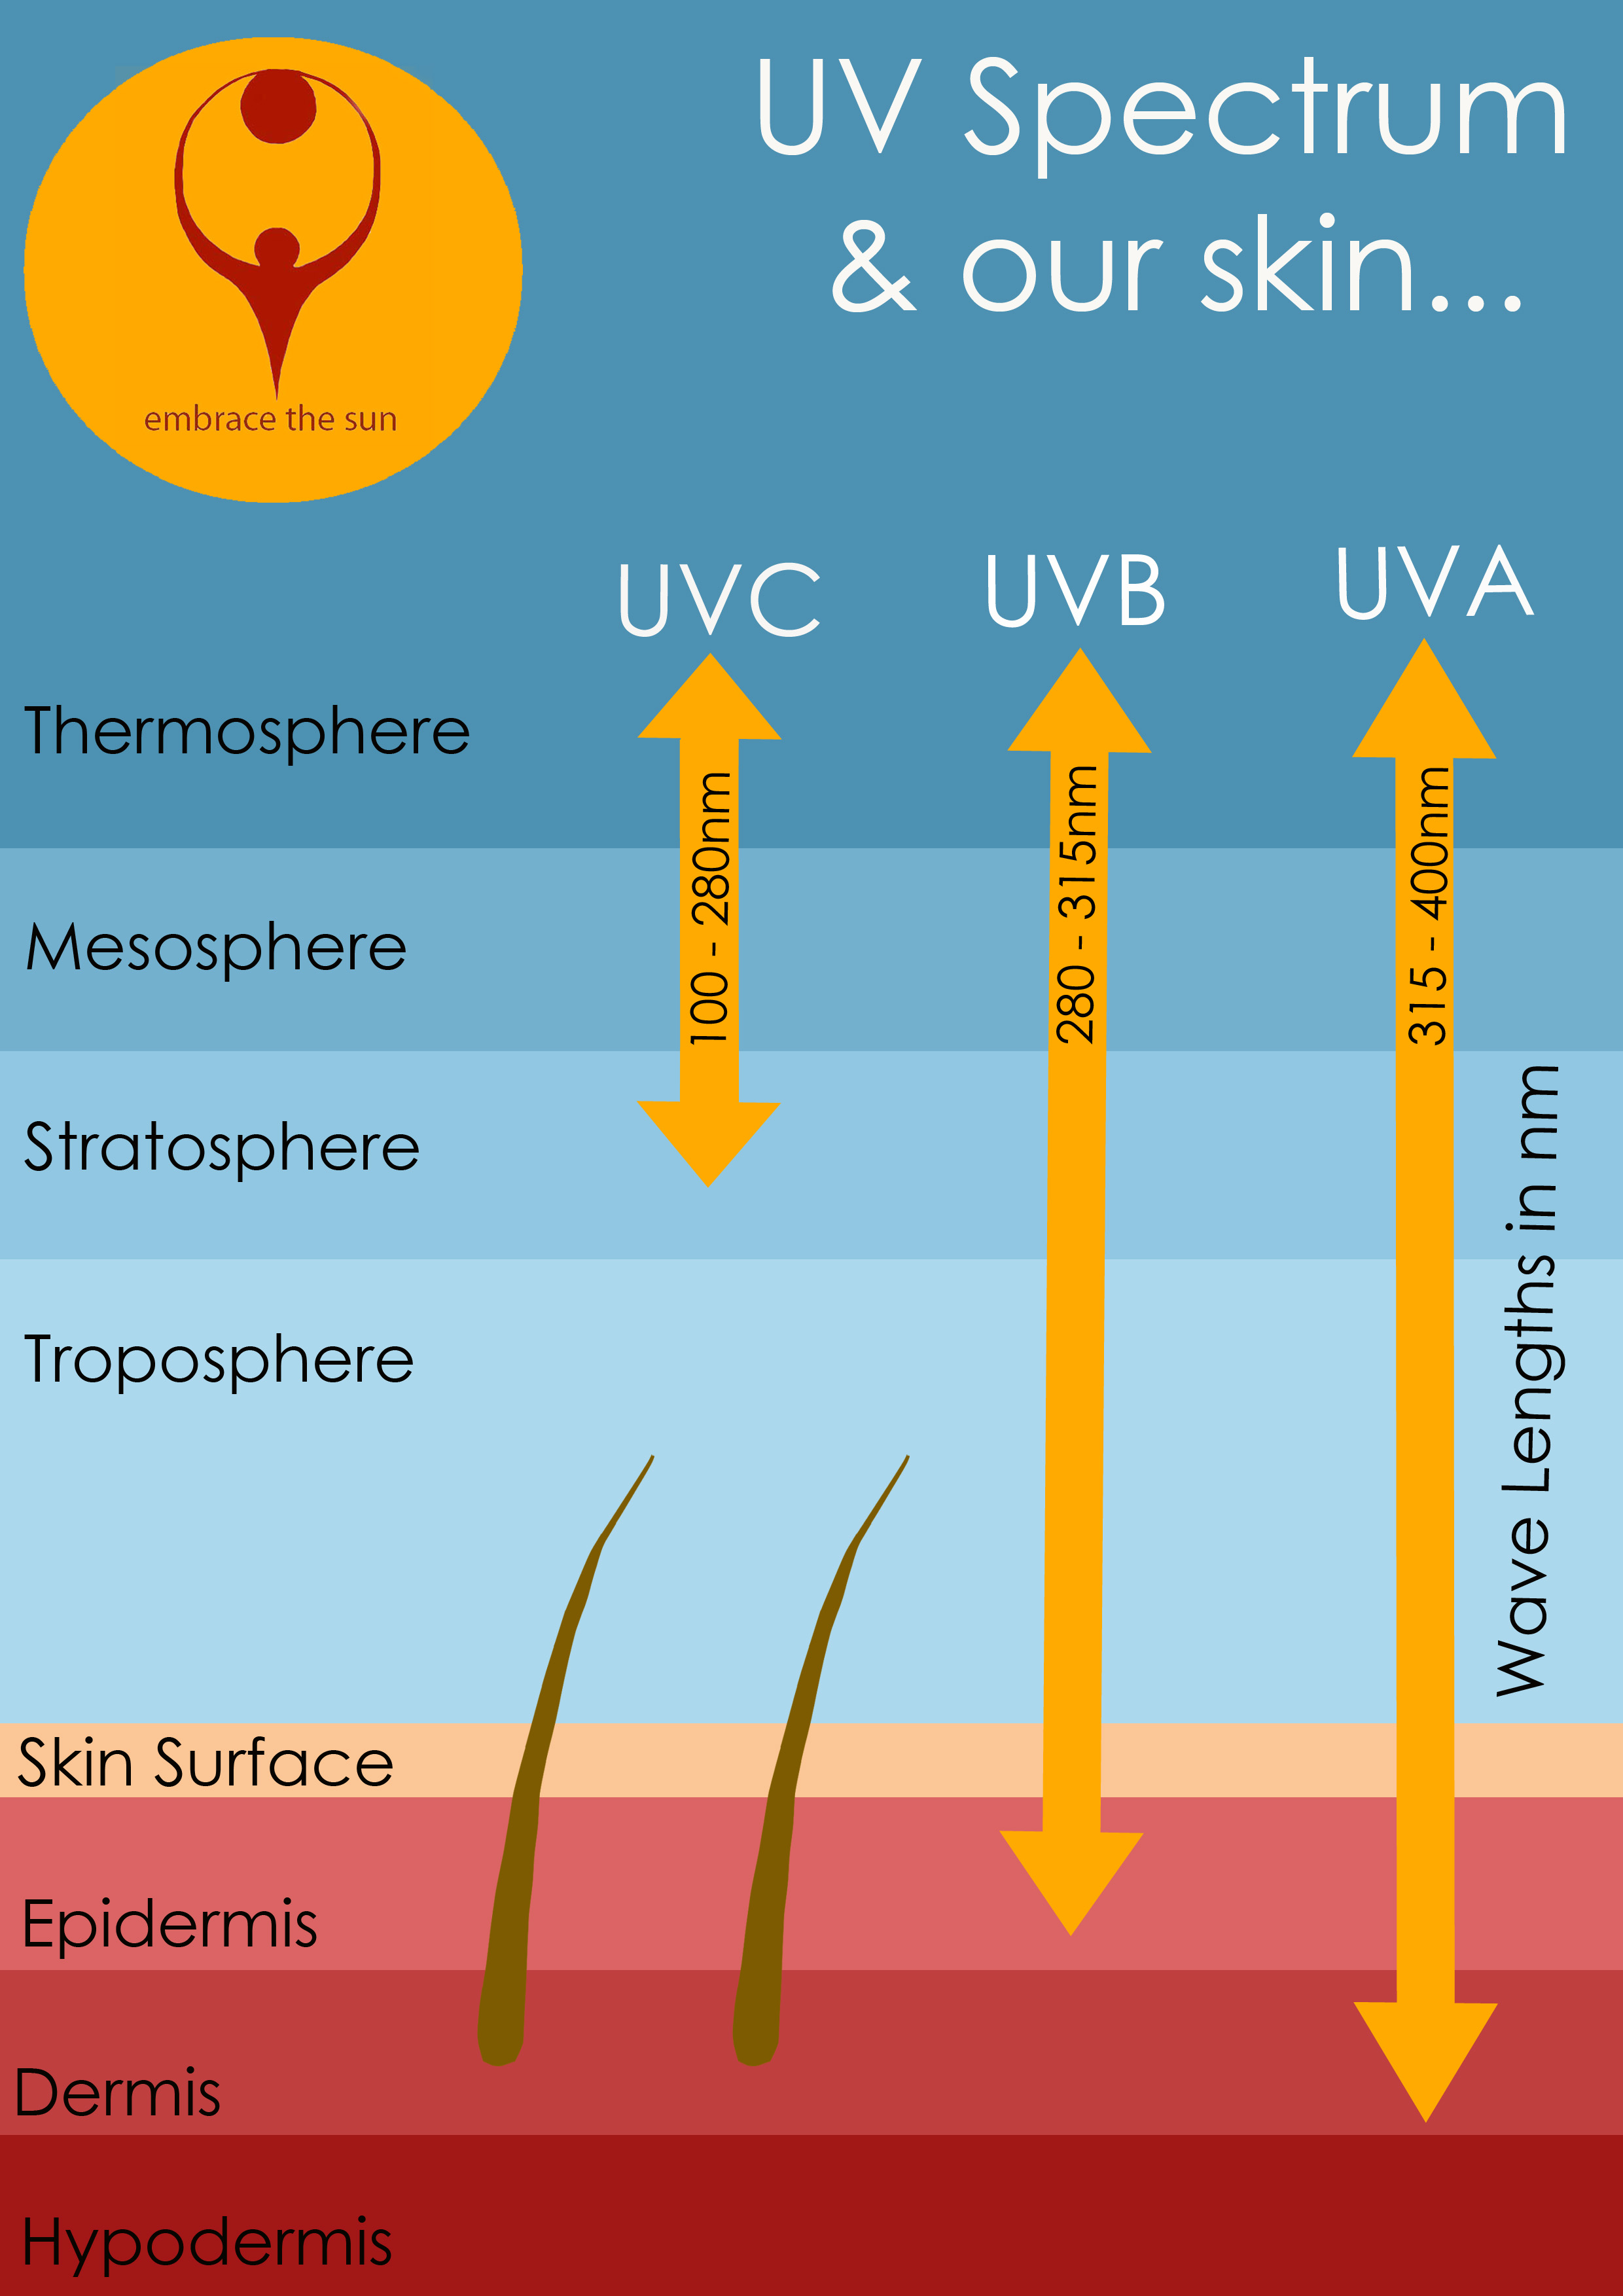 UV rays and our skin